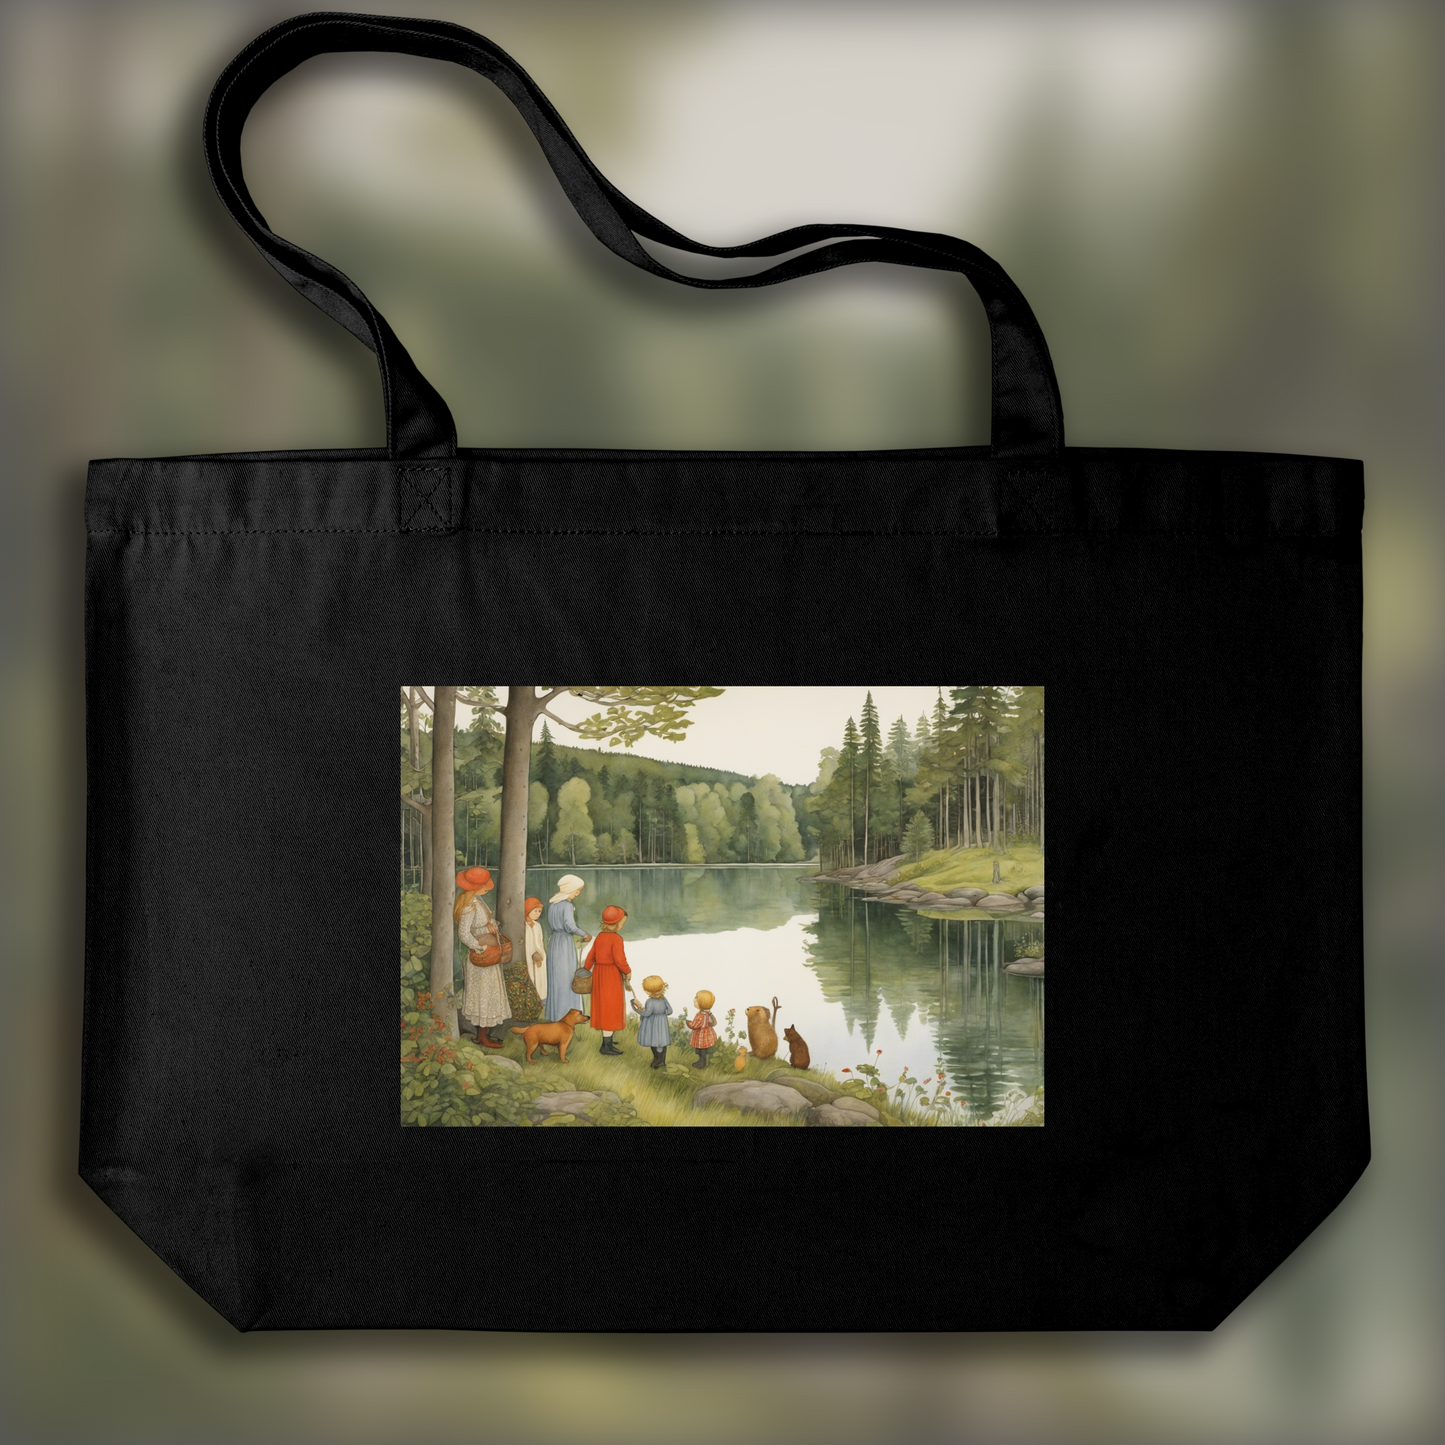 Tote bag - Elsa Beskow, A family near a lake, a forest - 656835157